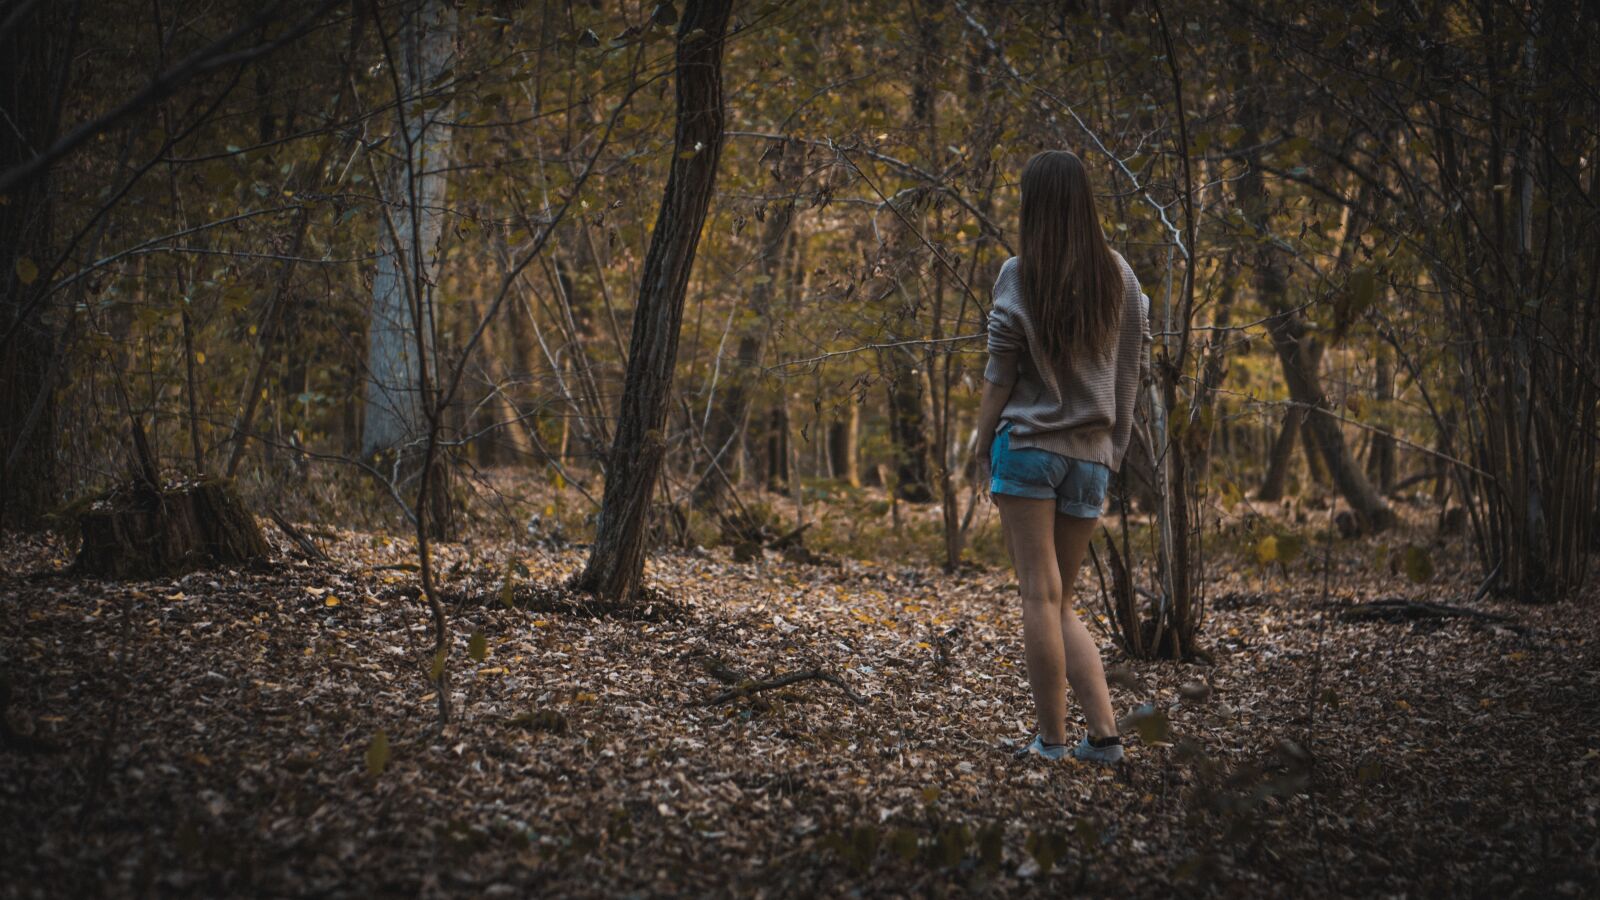 E 50mm F1.8 OSS sample photo. "Forest, girl, hiking" photography